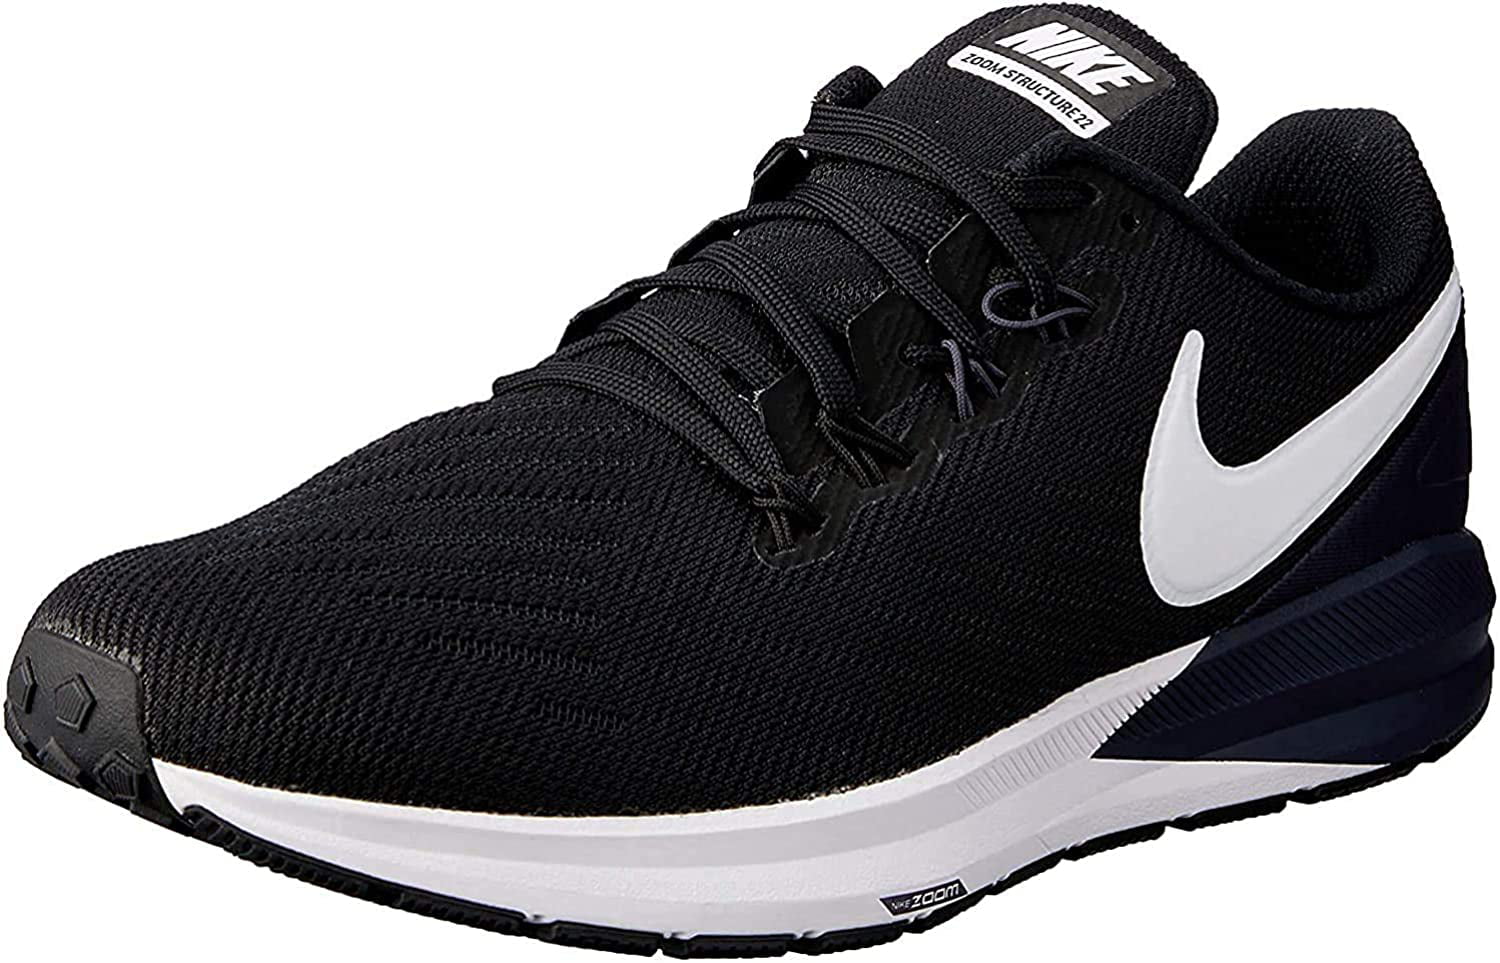 nike air zoom structure 22 running shoes Women's Shoe